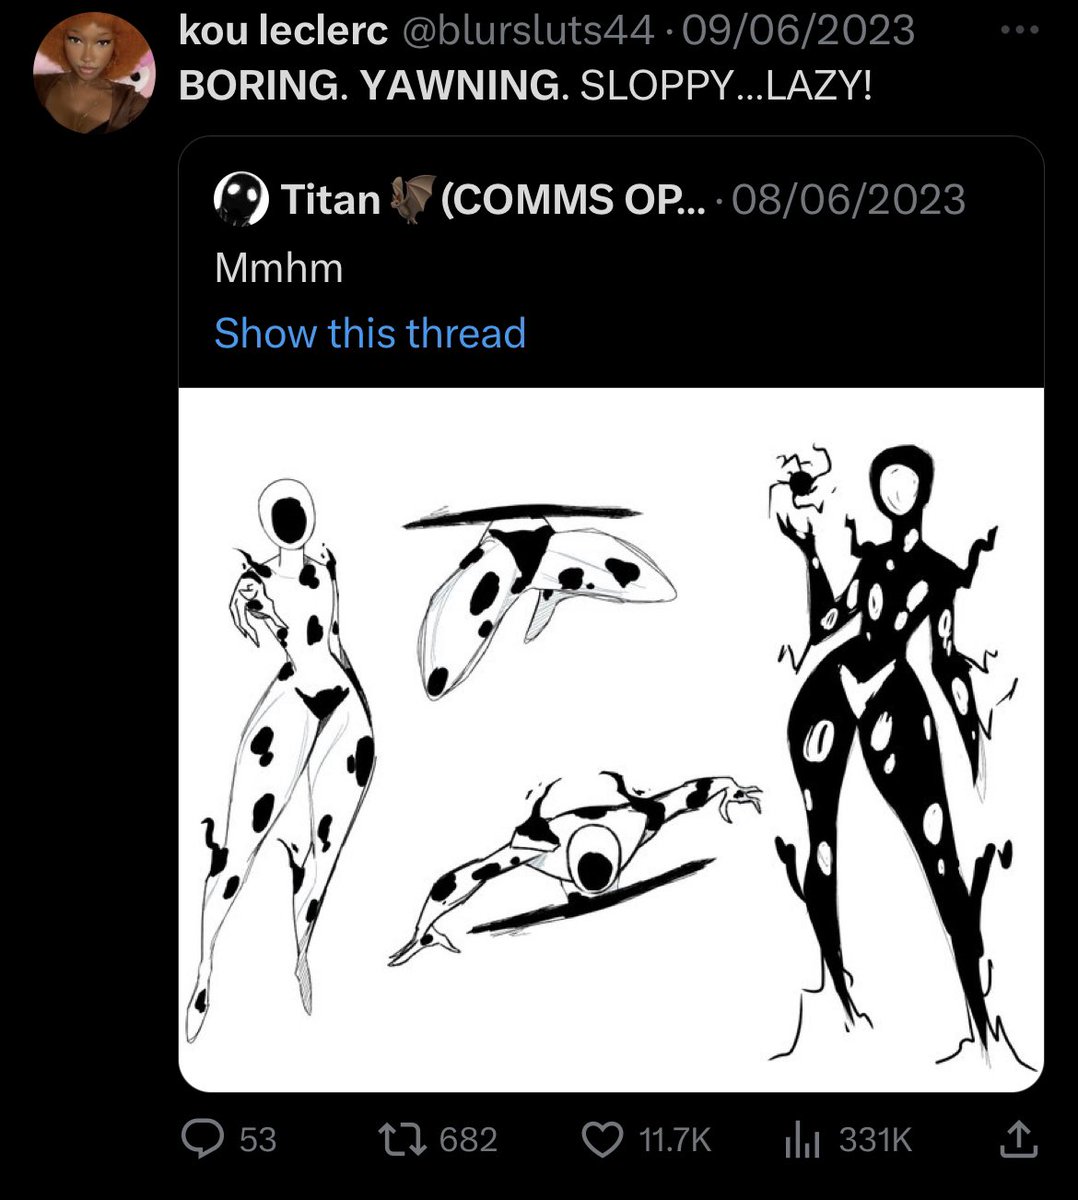 Never let Twitter users be art critics